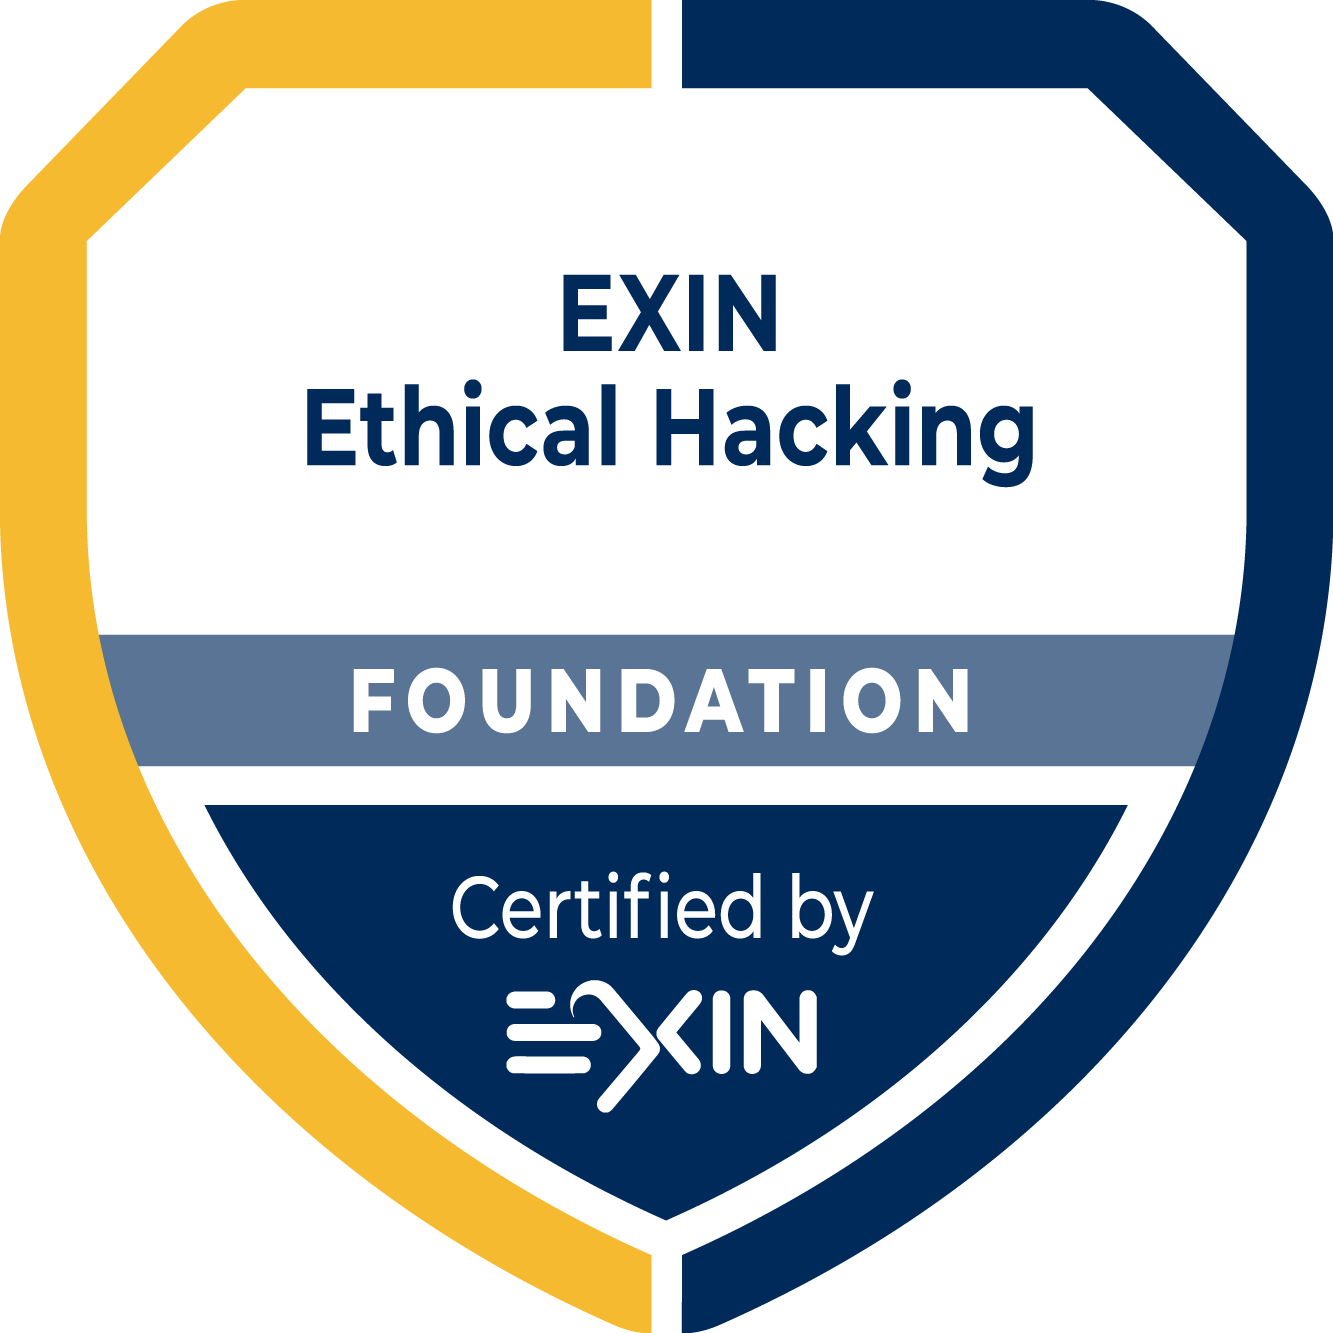 EXIN Ethical Hacking Foundation